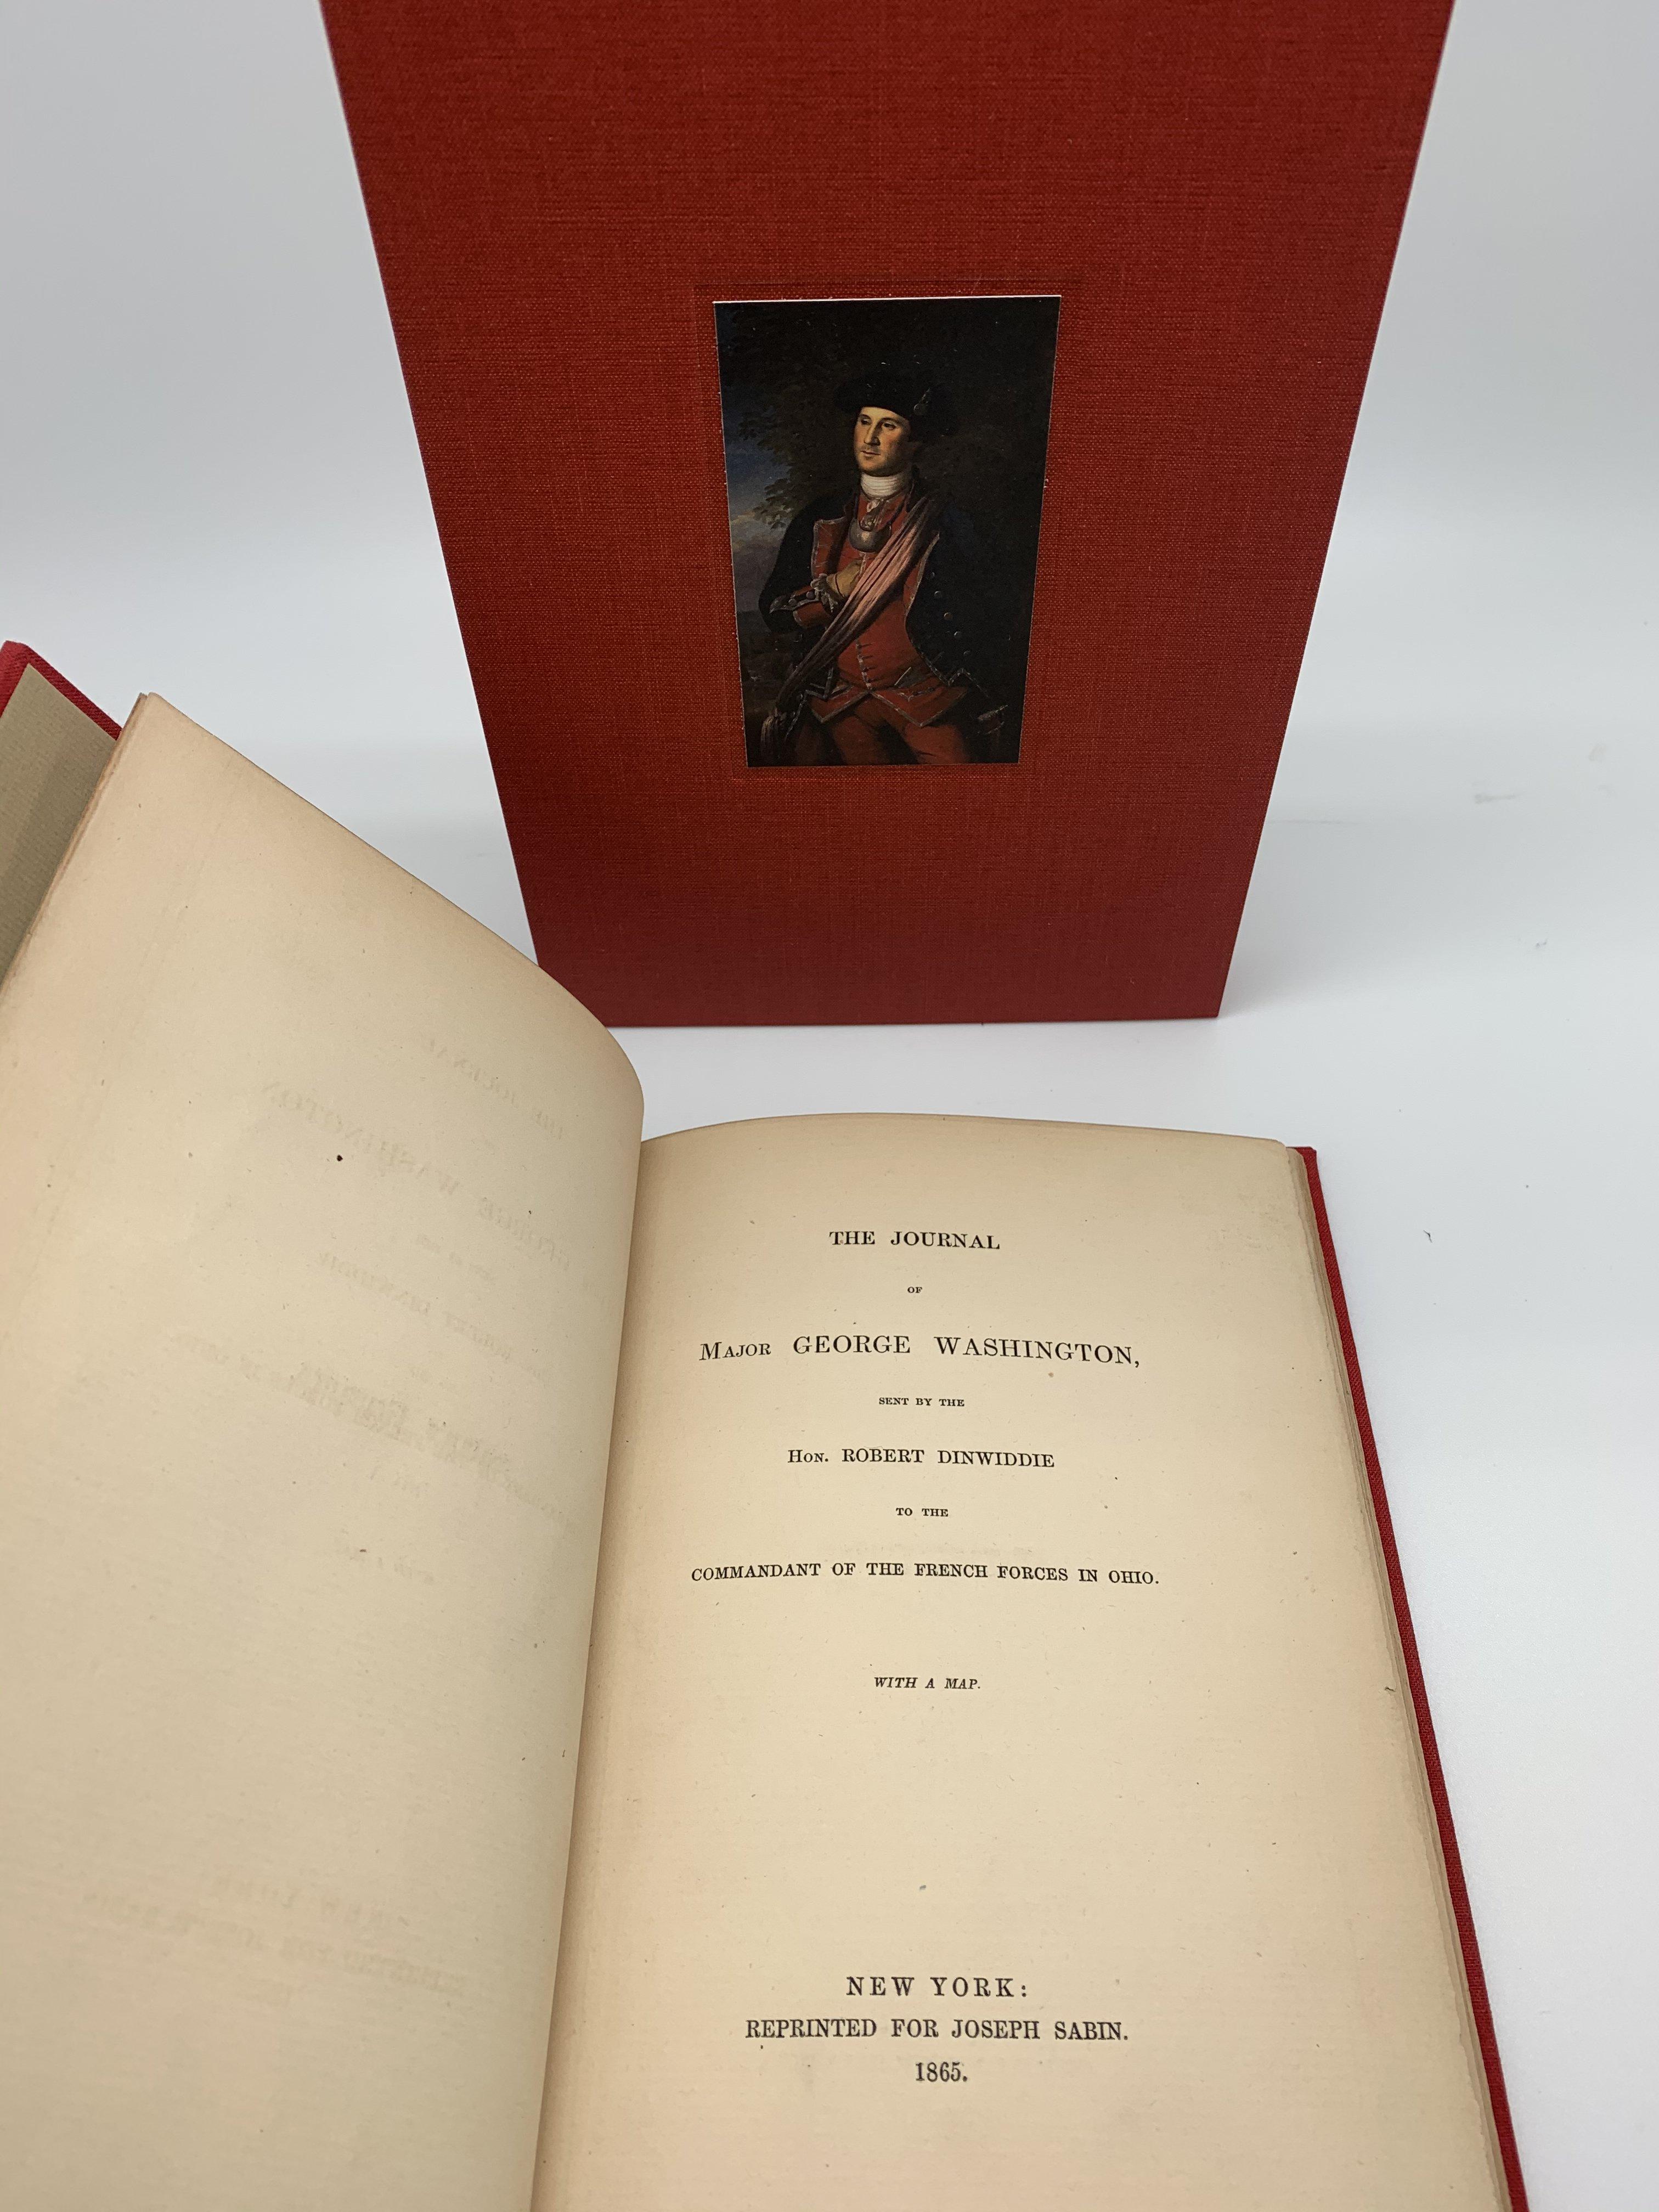 The Journal of Major George Washington sent by the Honorable Robert Dinwiddie. New York: Joseph Sabin, 1865. Limited edition. Includes folding map and housed in custom archival slipcase.

This 1865 reprint of The Journal of Major George Washington